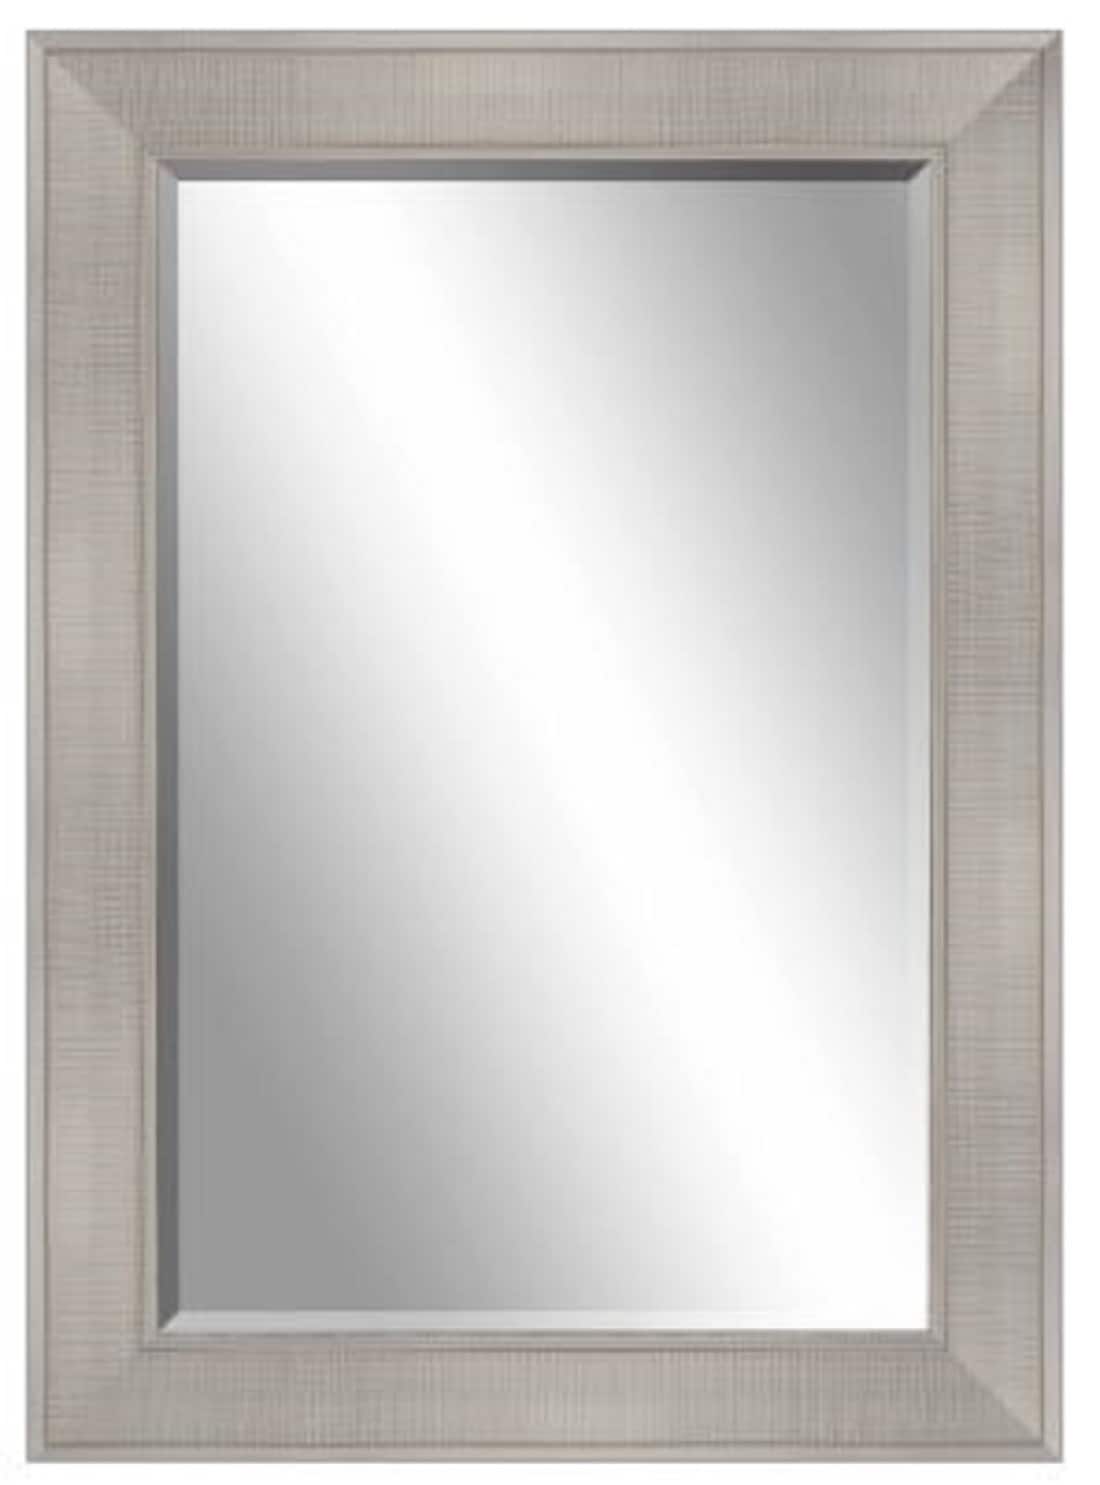 Style Selections Beveled Wall Mirror - Silver - 32 L x 26 W - Each